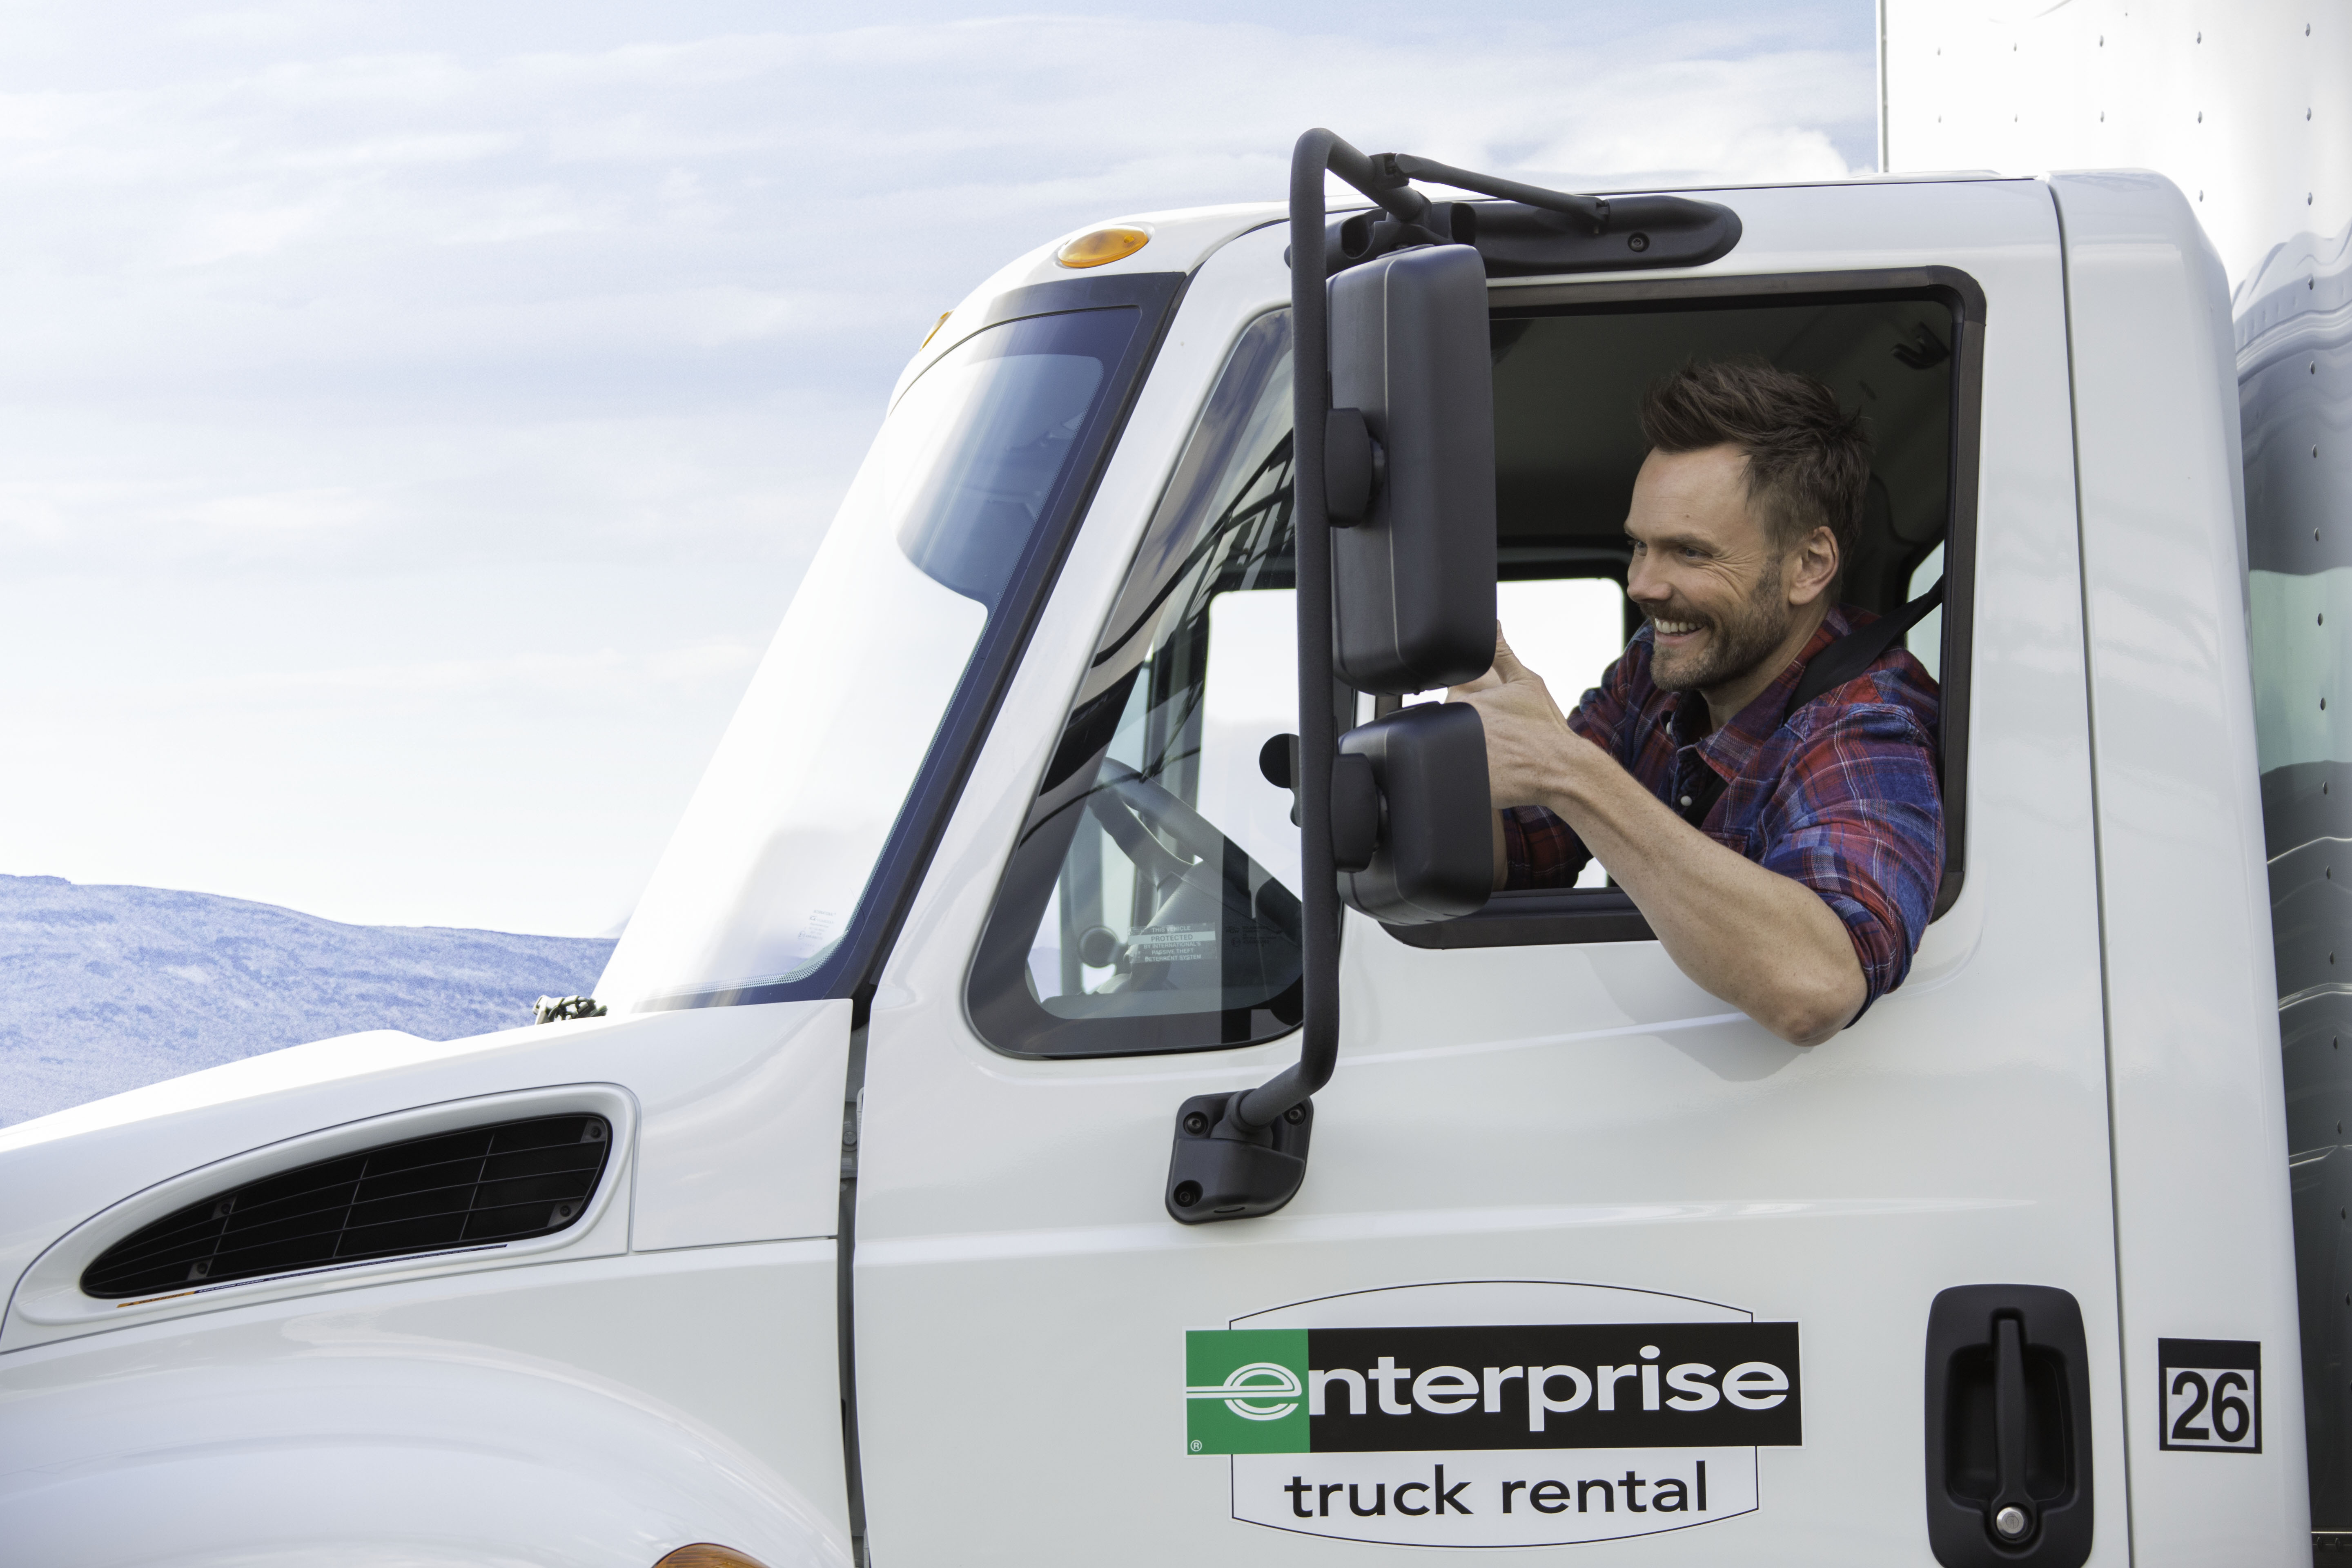 Enterprise Rent-A-Car launches new brand positioning campaign to highlight its comprehensive transportation offerings beyond car rental